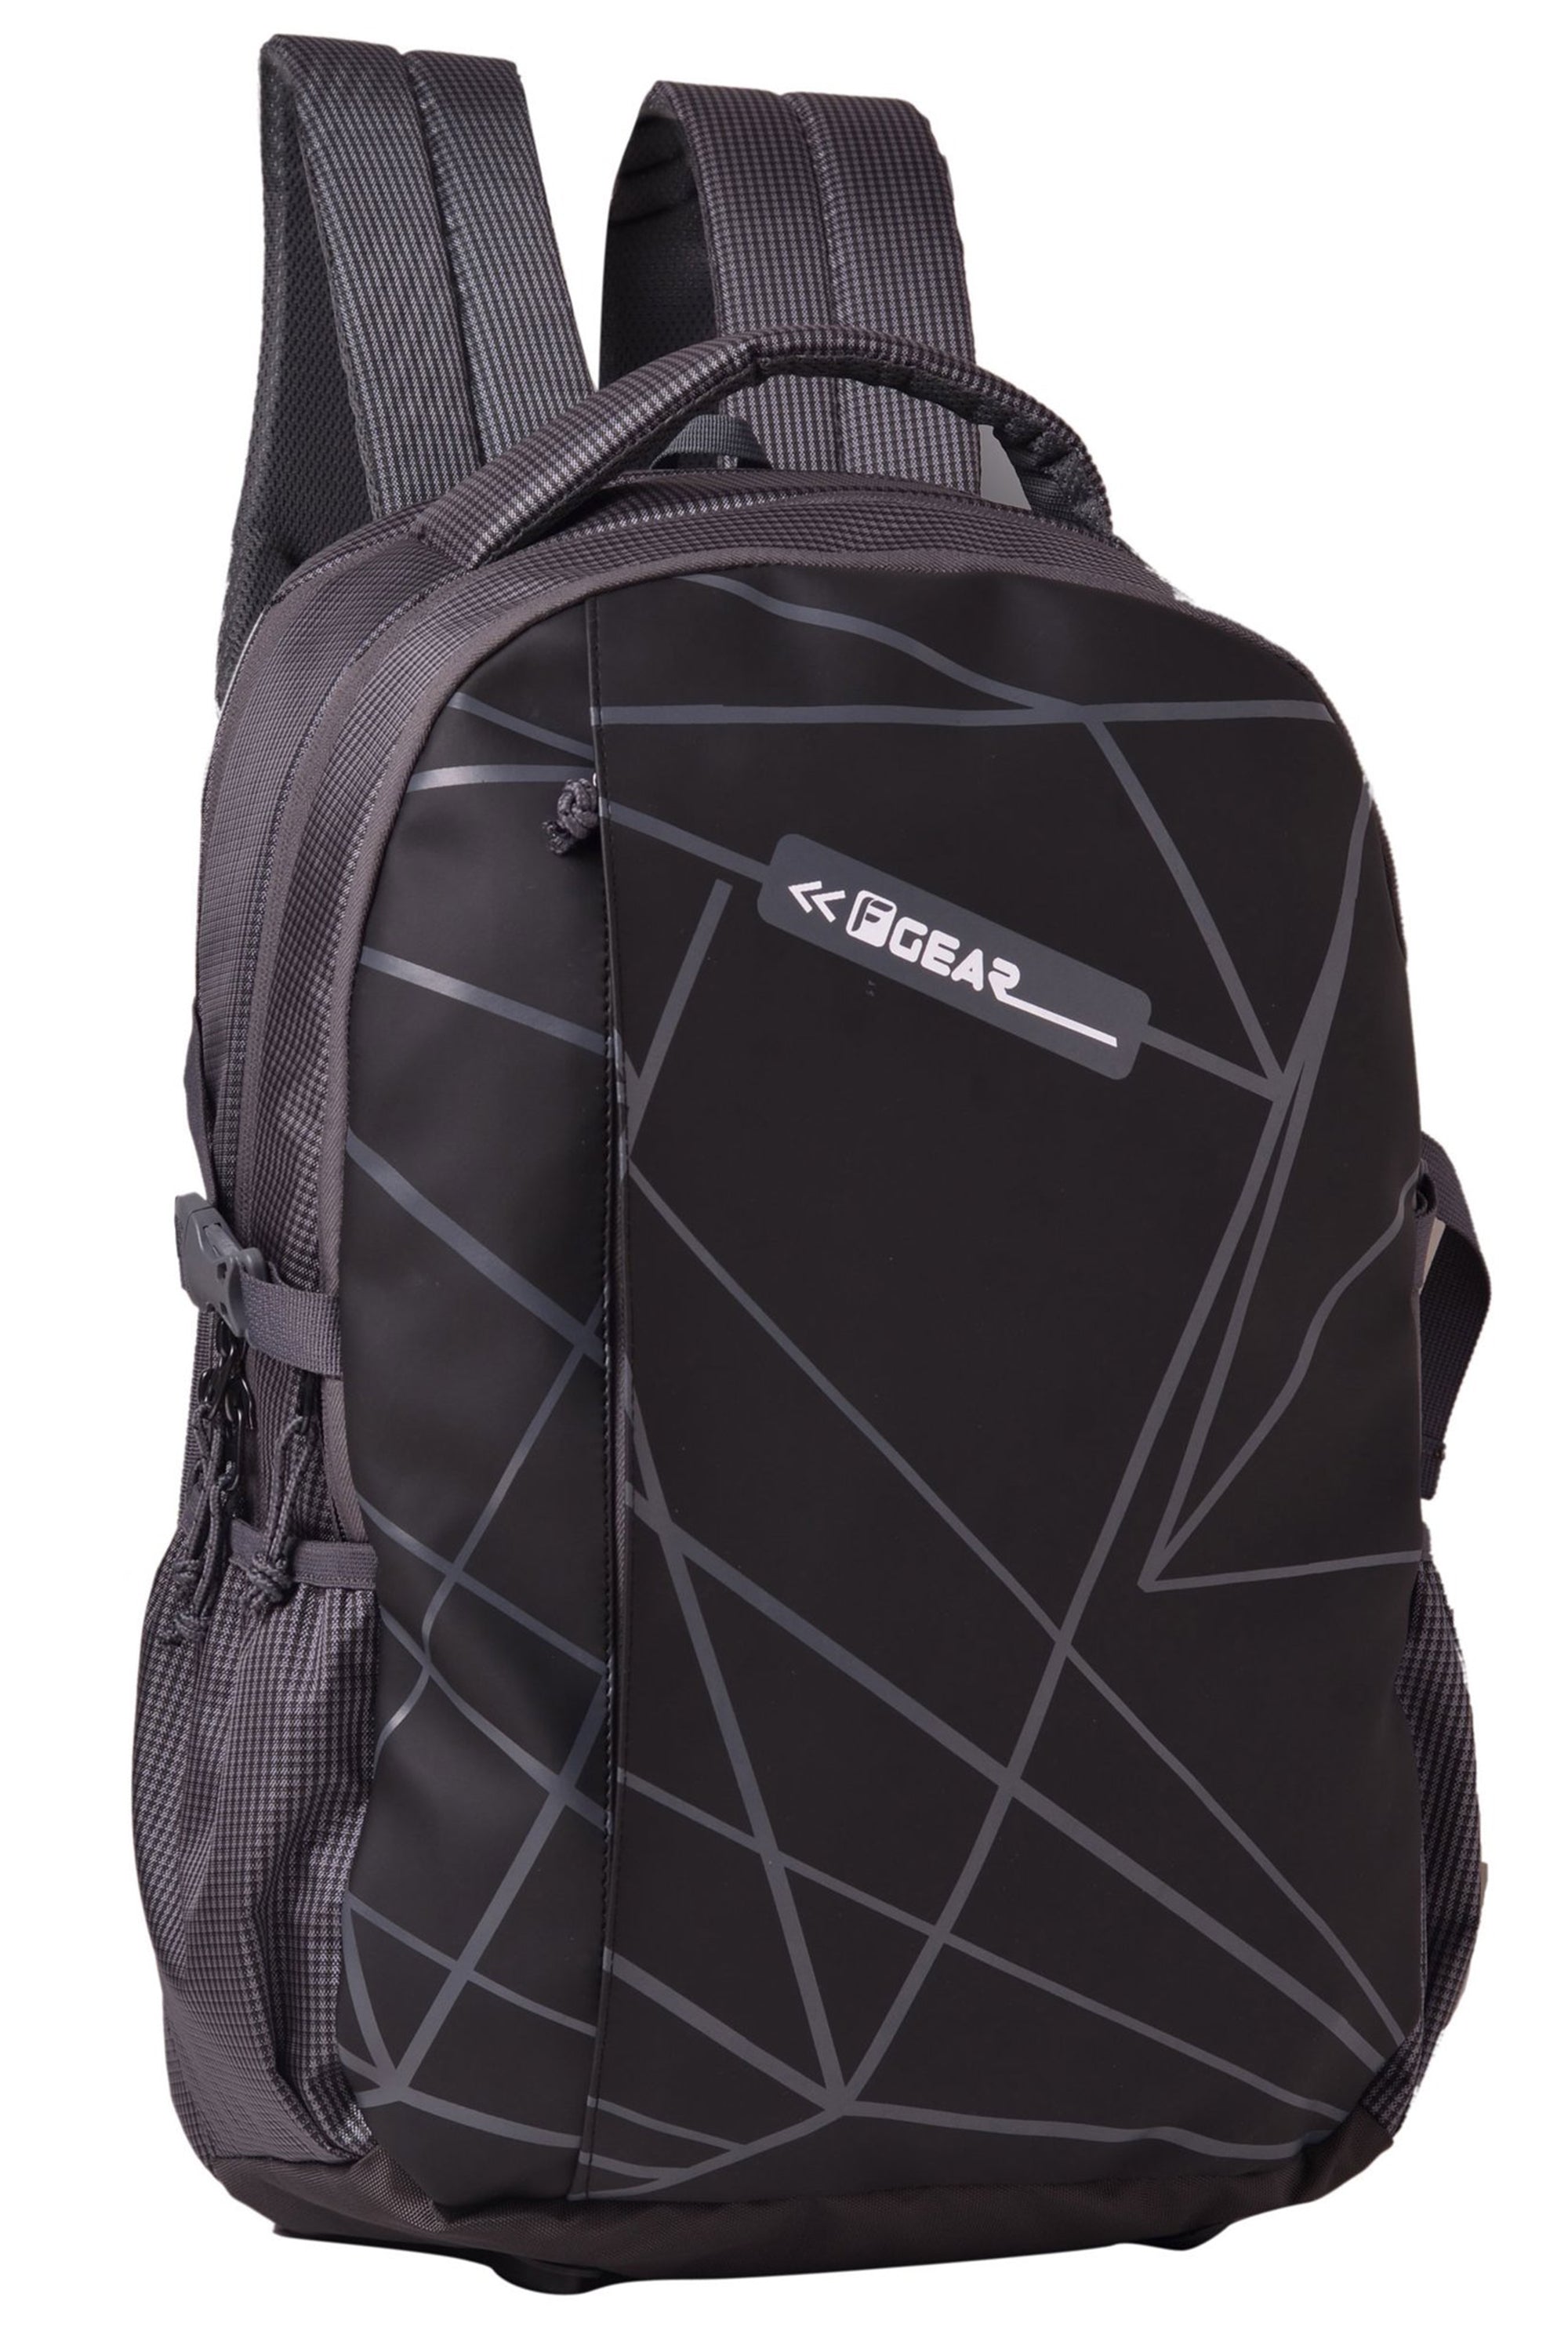 Buy American Tourister Backpack Online Kuwait